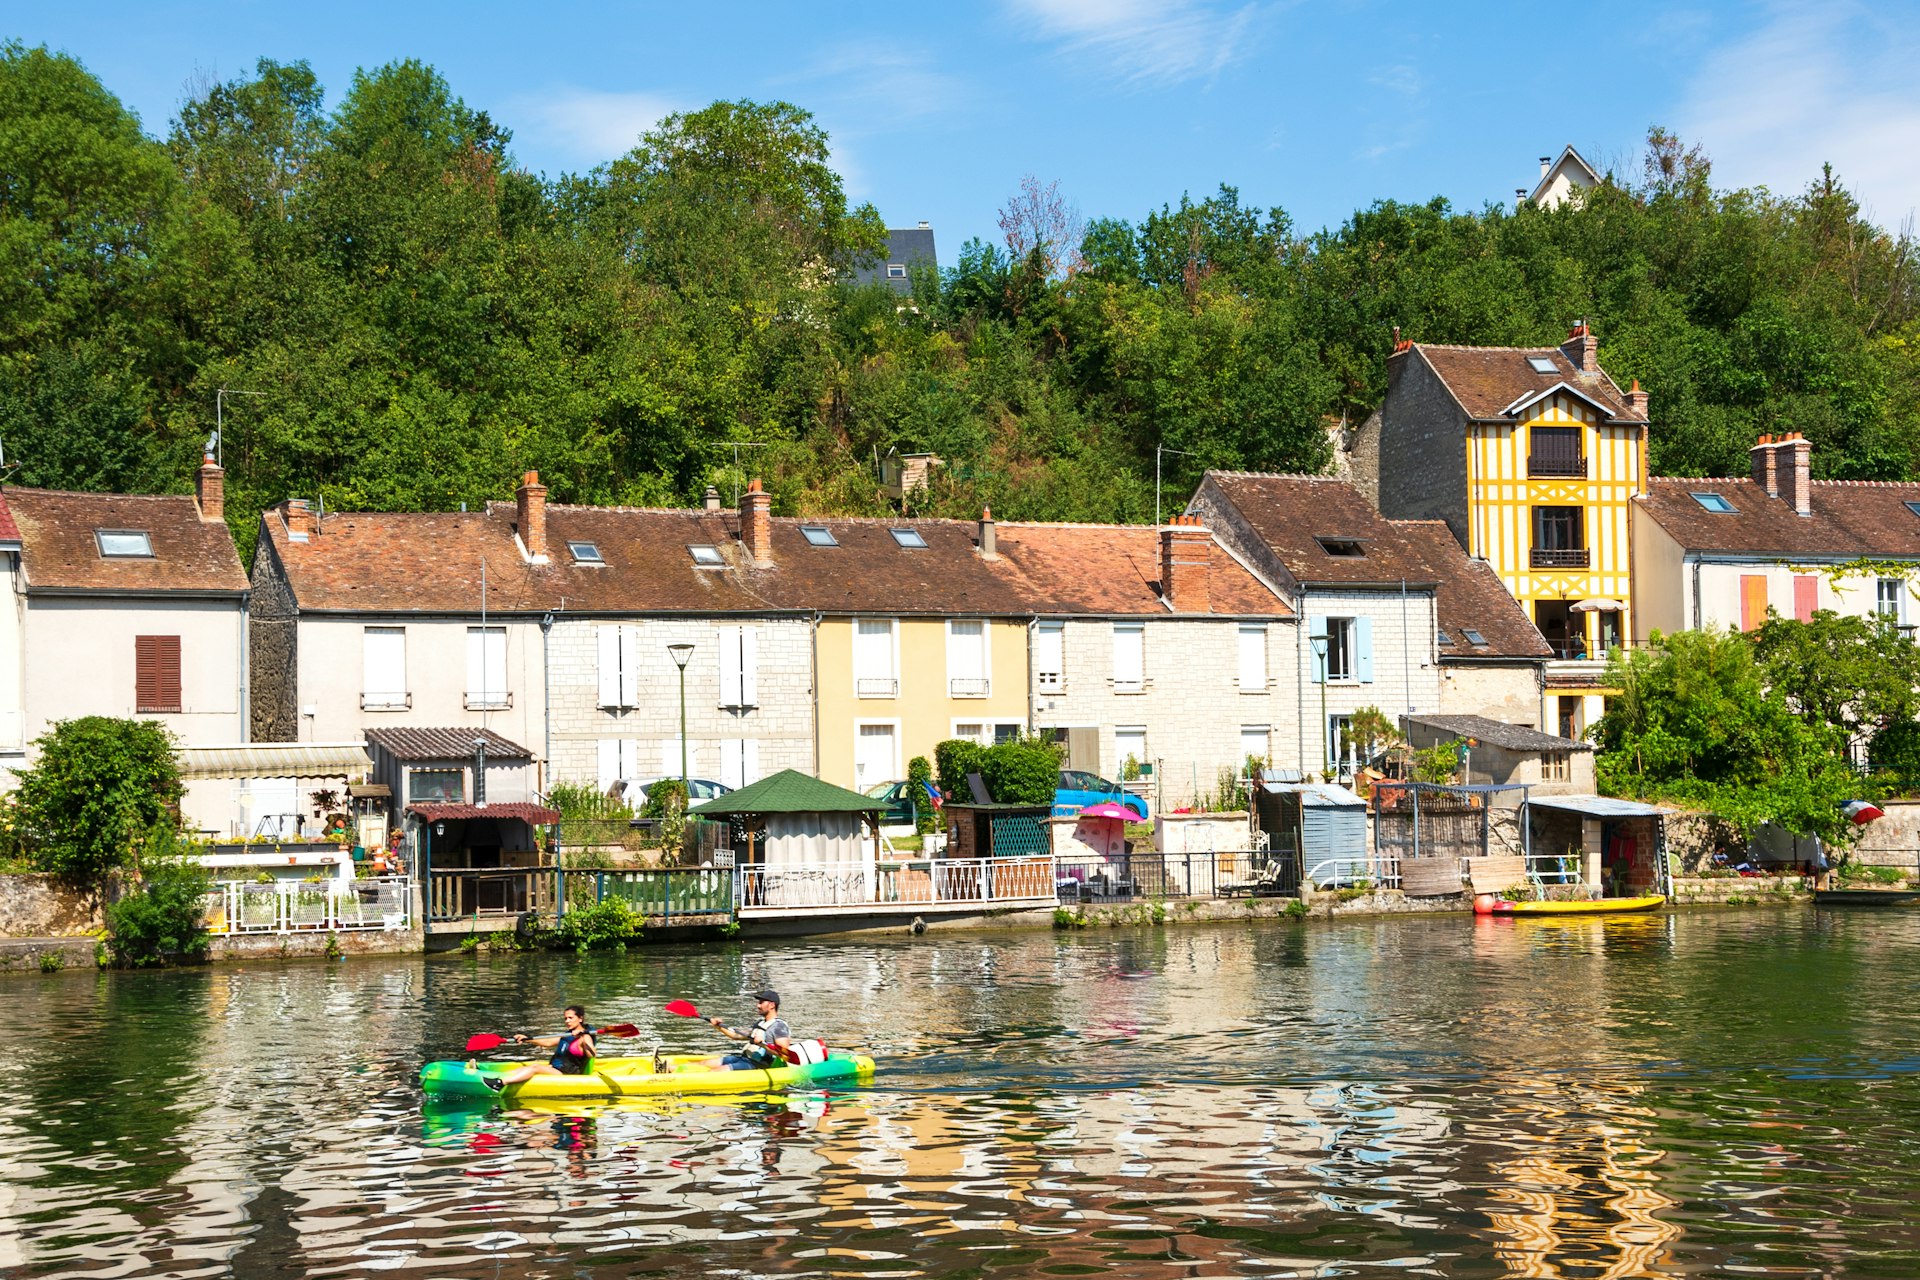 Couple paddling a kayak on the Loing river with picturesque houses in the background. Nemours is a medieval town in at Seine-et-Marne department of Ile-de-France.